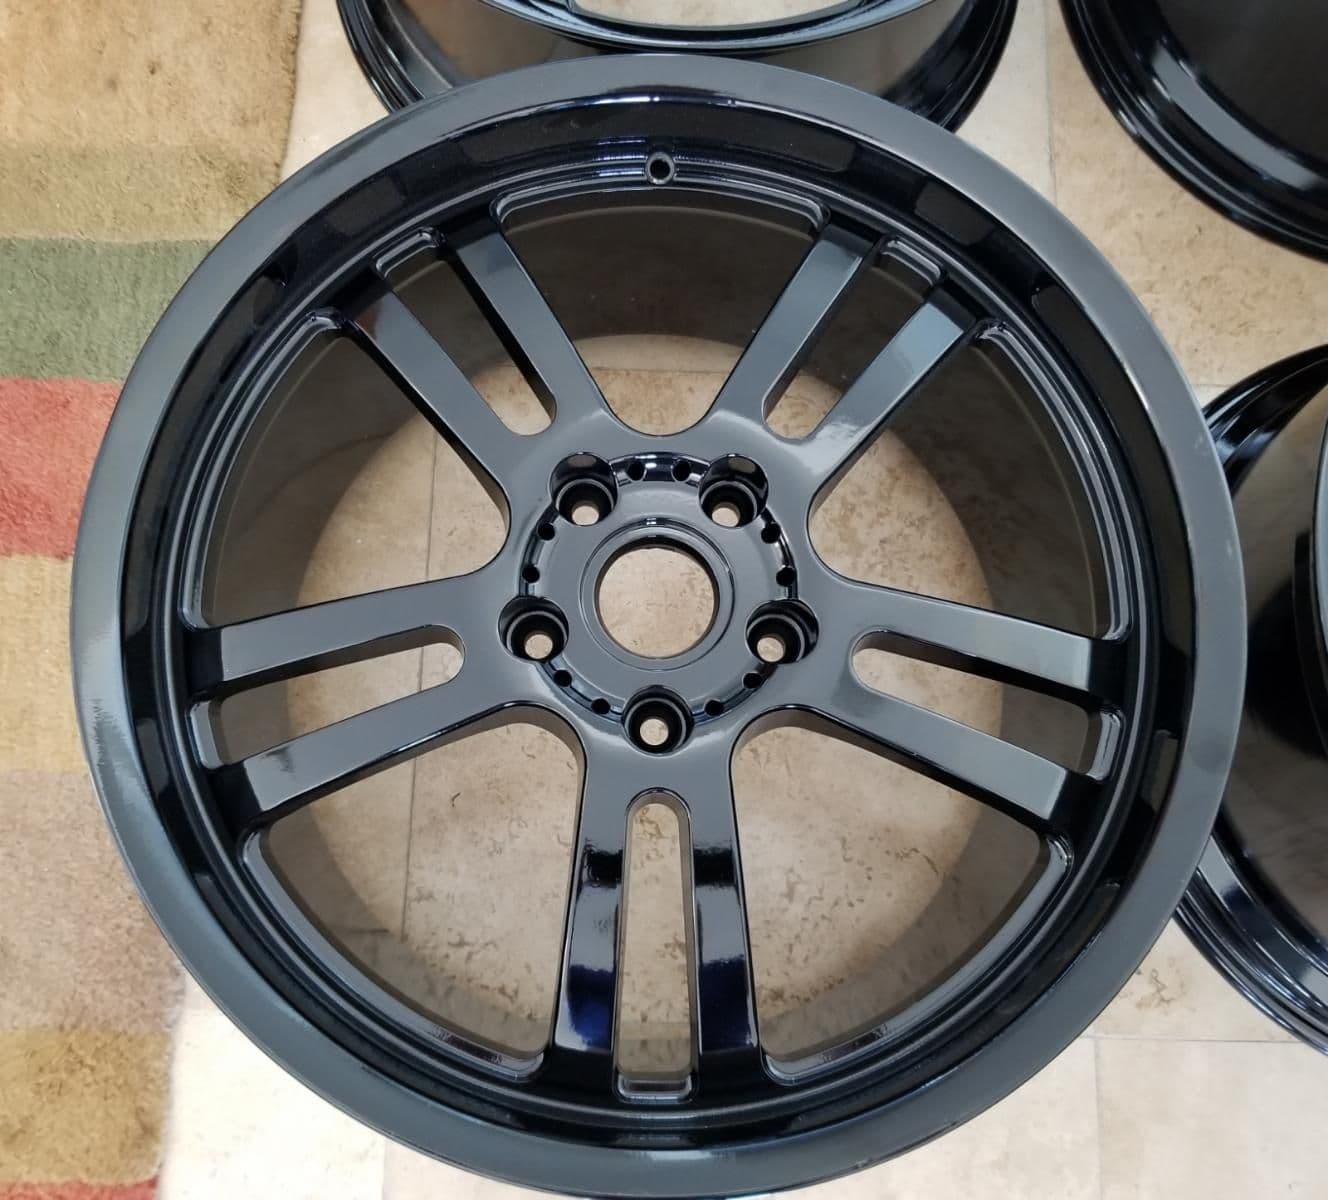 Wheels and Tires/Axles - CHAMPION RS-128 FORGED WHEELS 997 991 CAYENNE - Used - 2005 to 2019 Porsche 911 - Treasure Island, FL 33706, United States